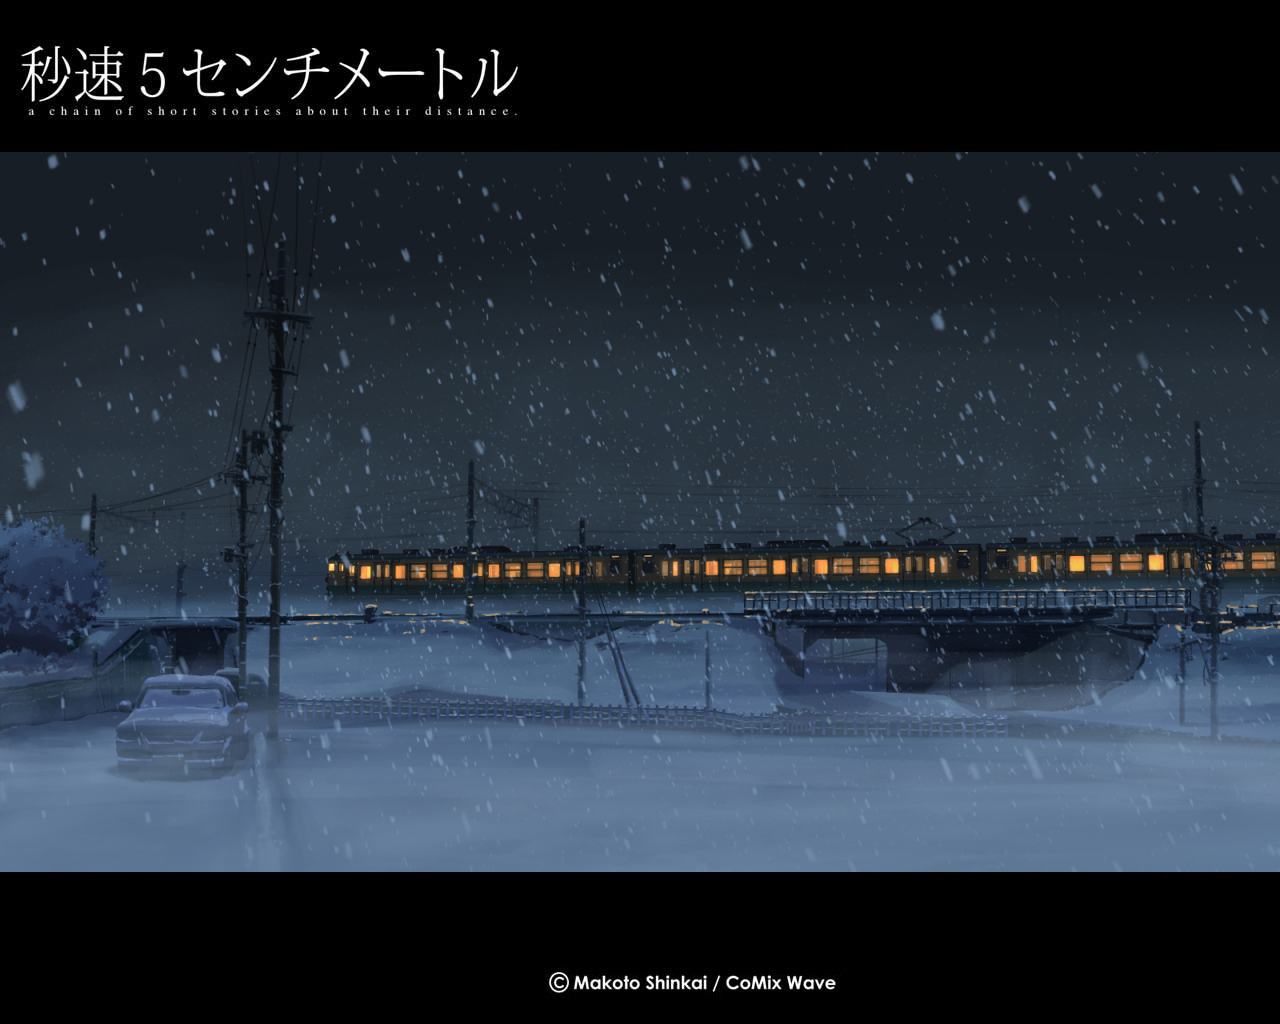 From 5 Centimeters Per Second.